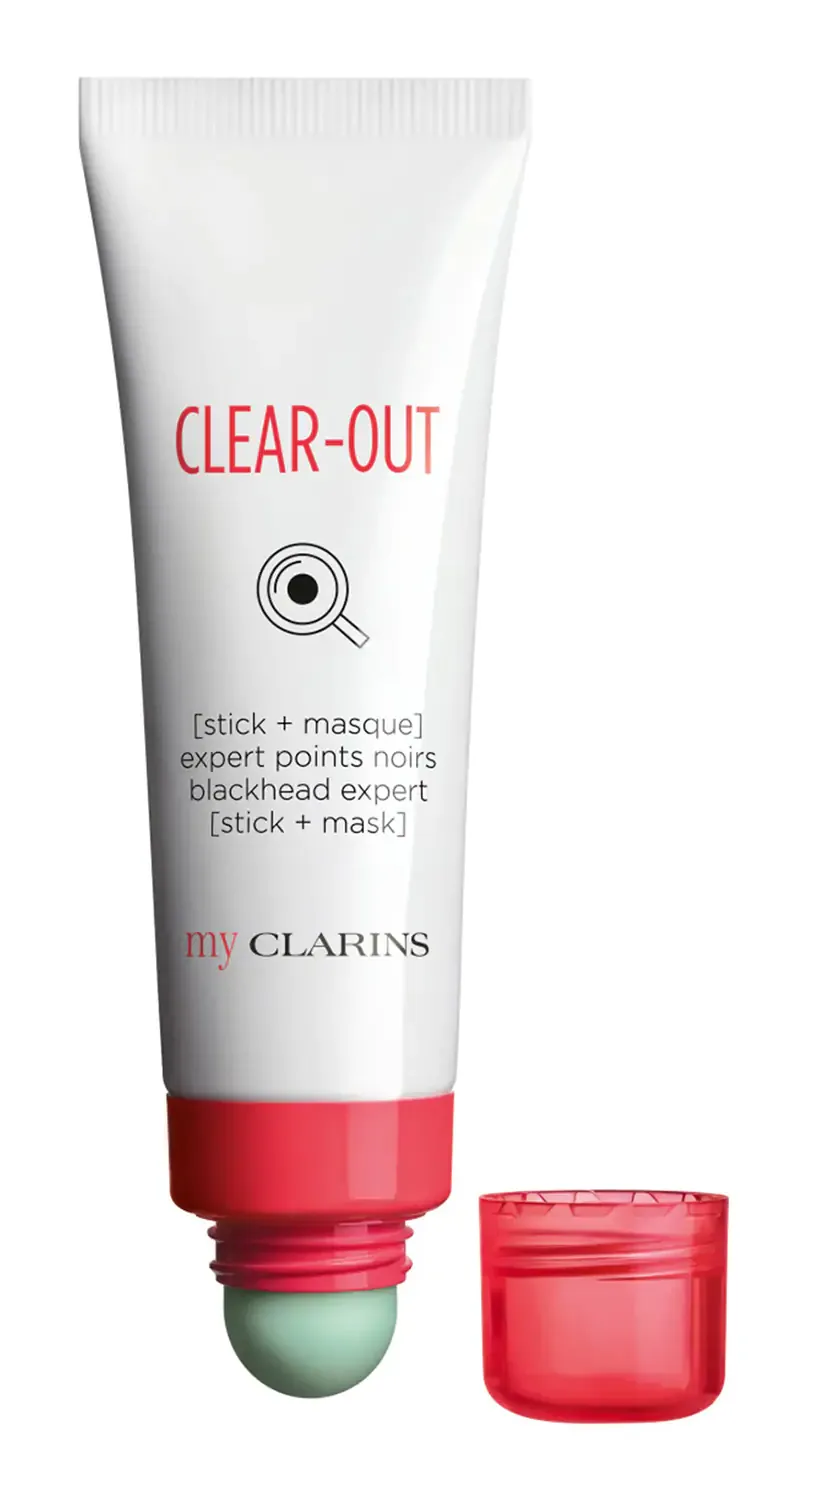 My Clarins Clear-Out Stick and Mask